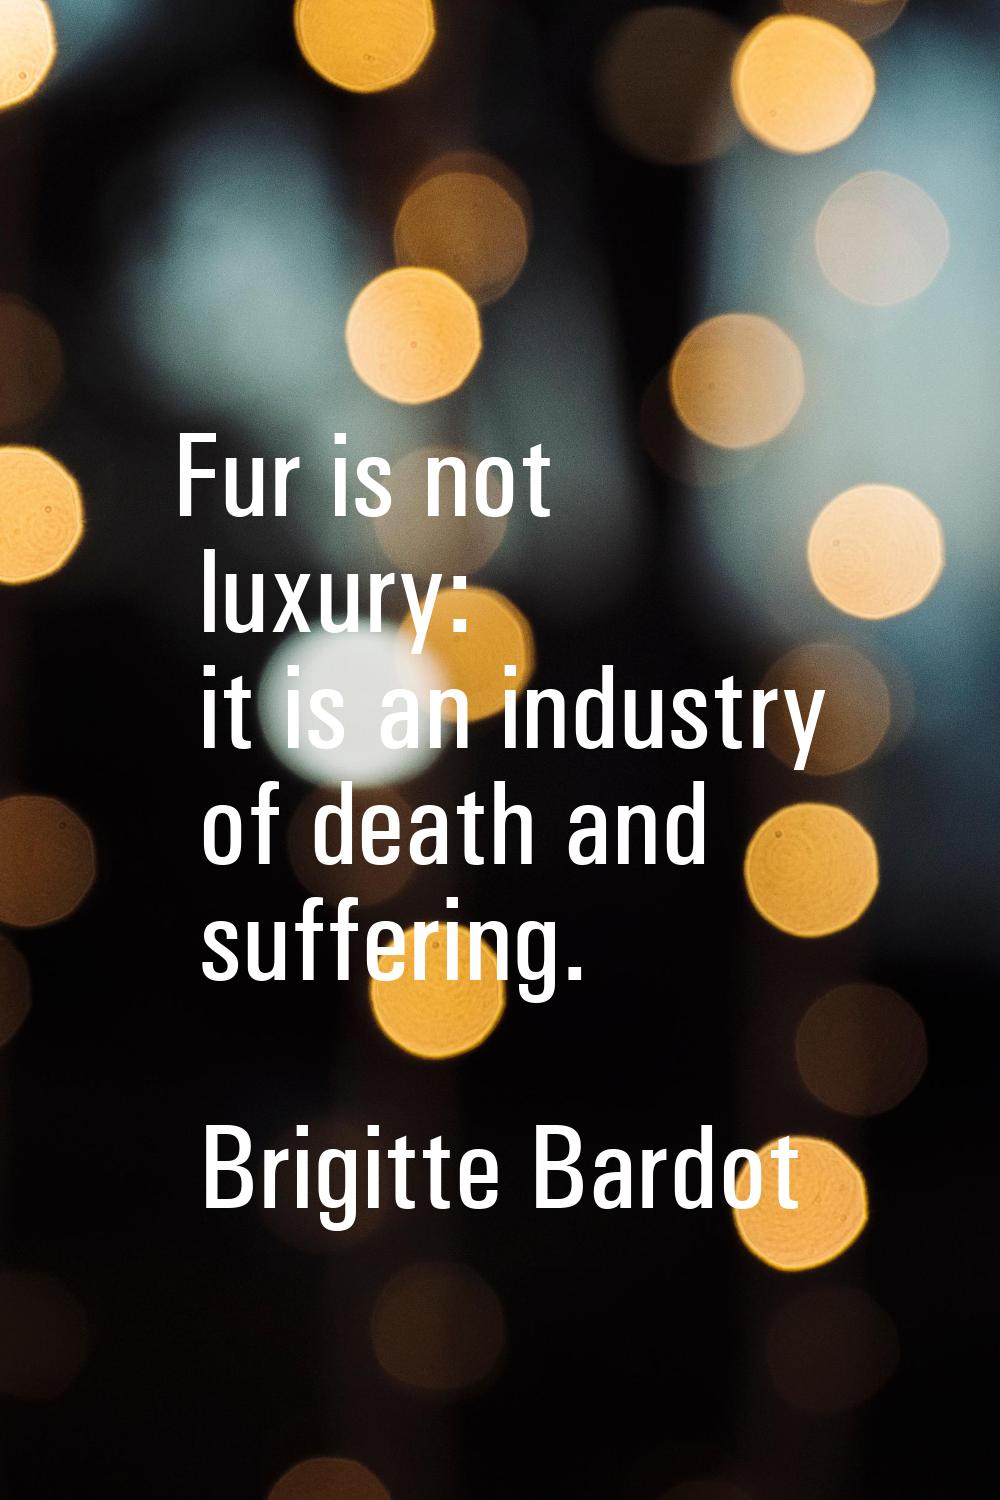 Fur is not luxury: it is an industry of death and suffering.